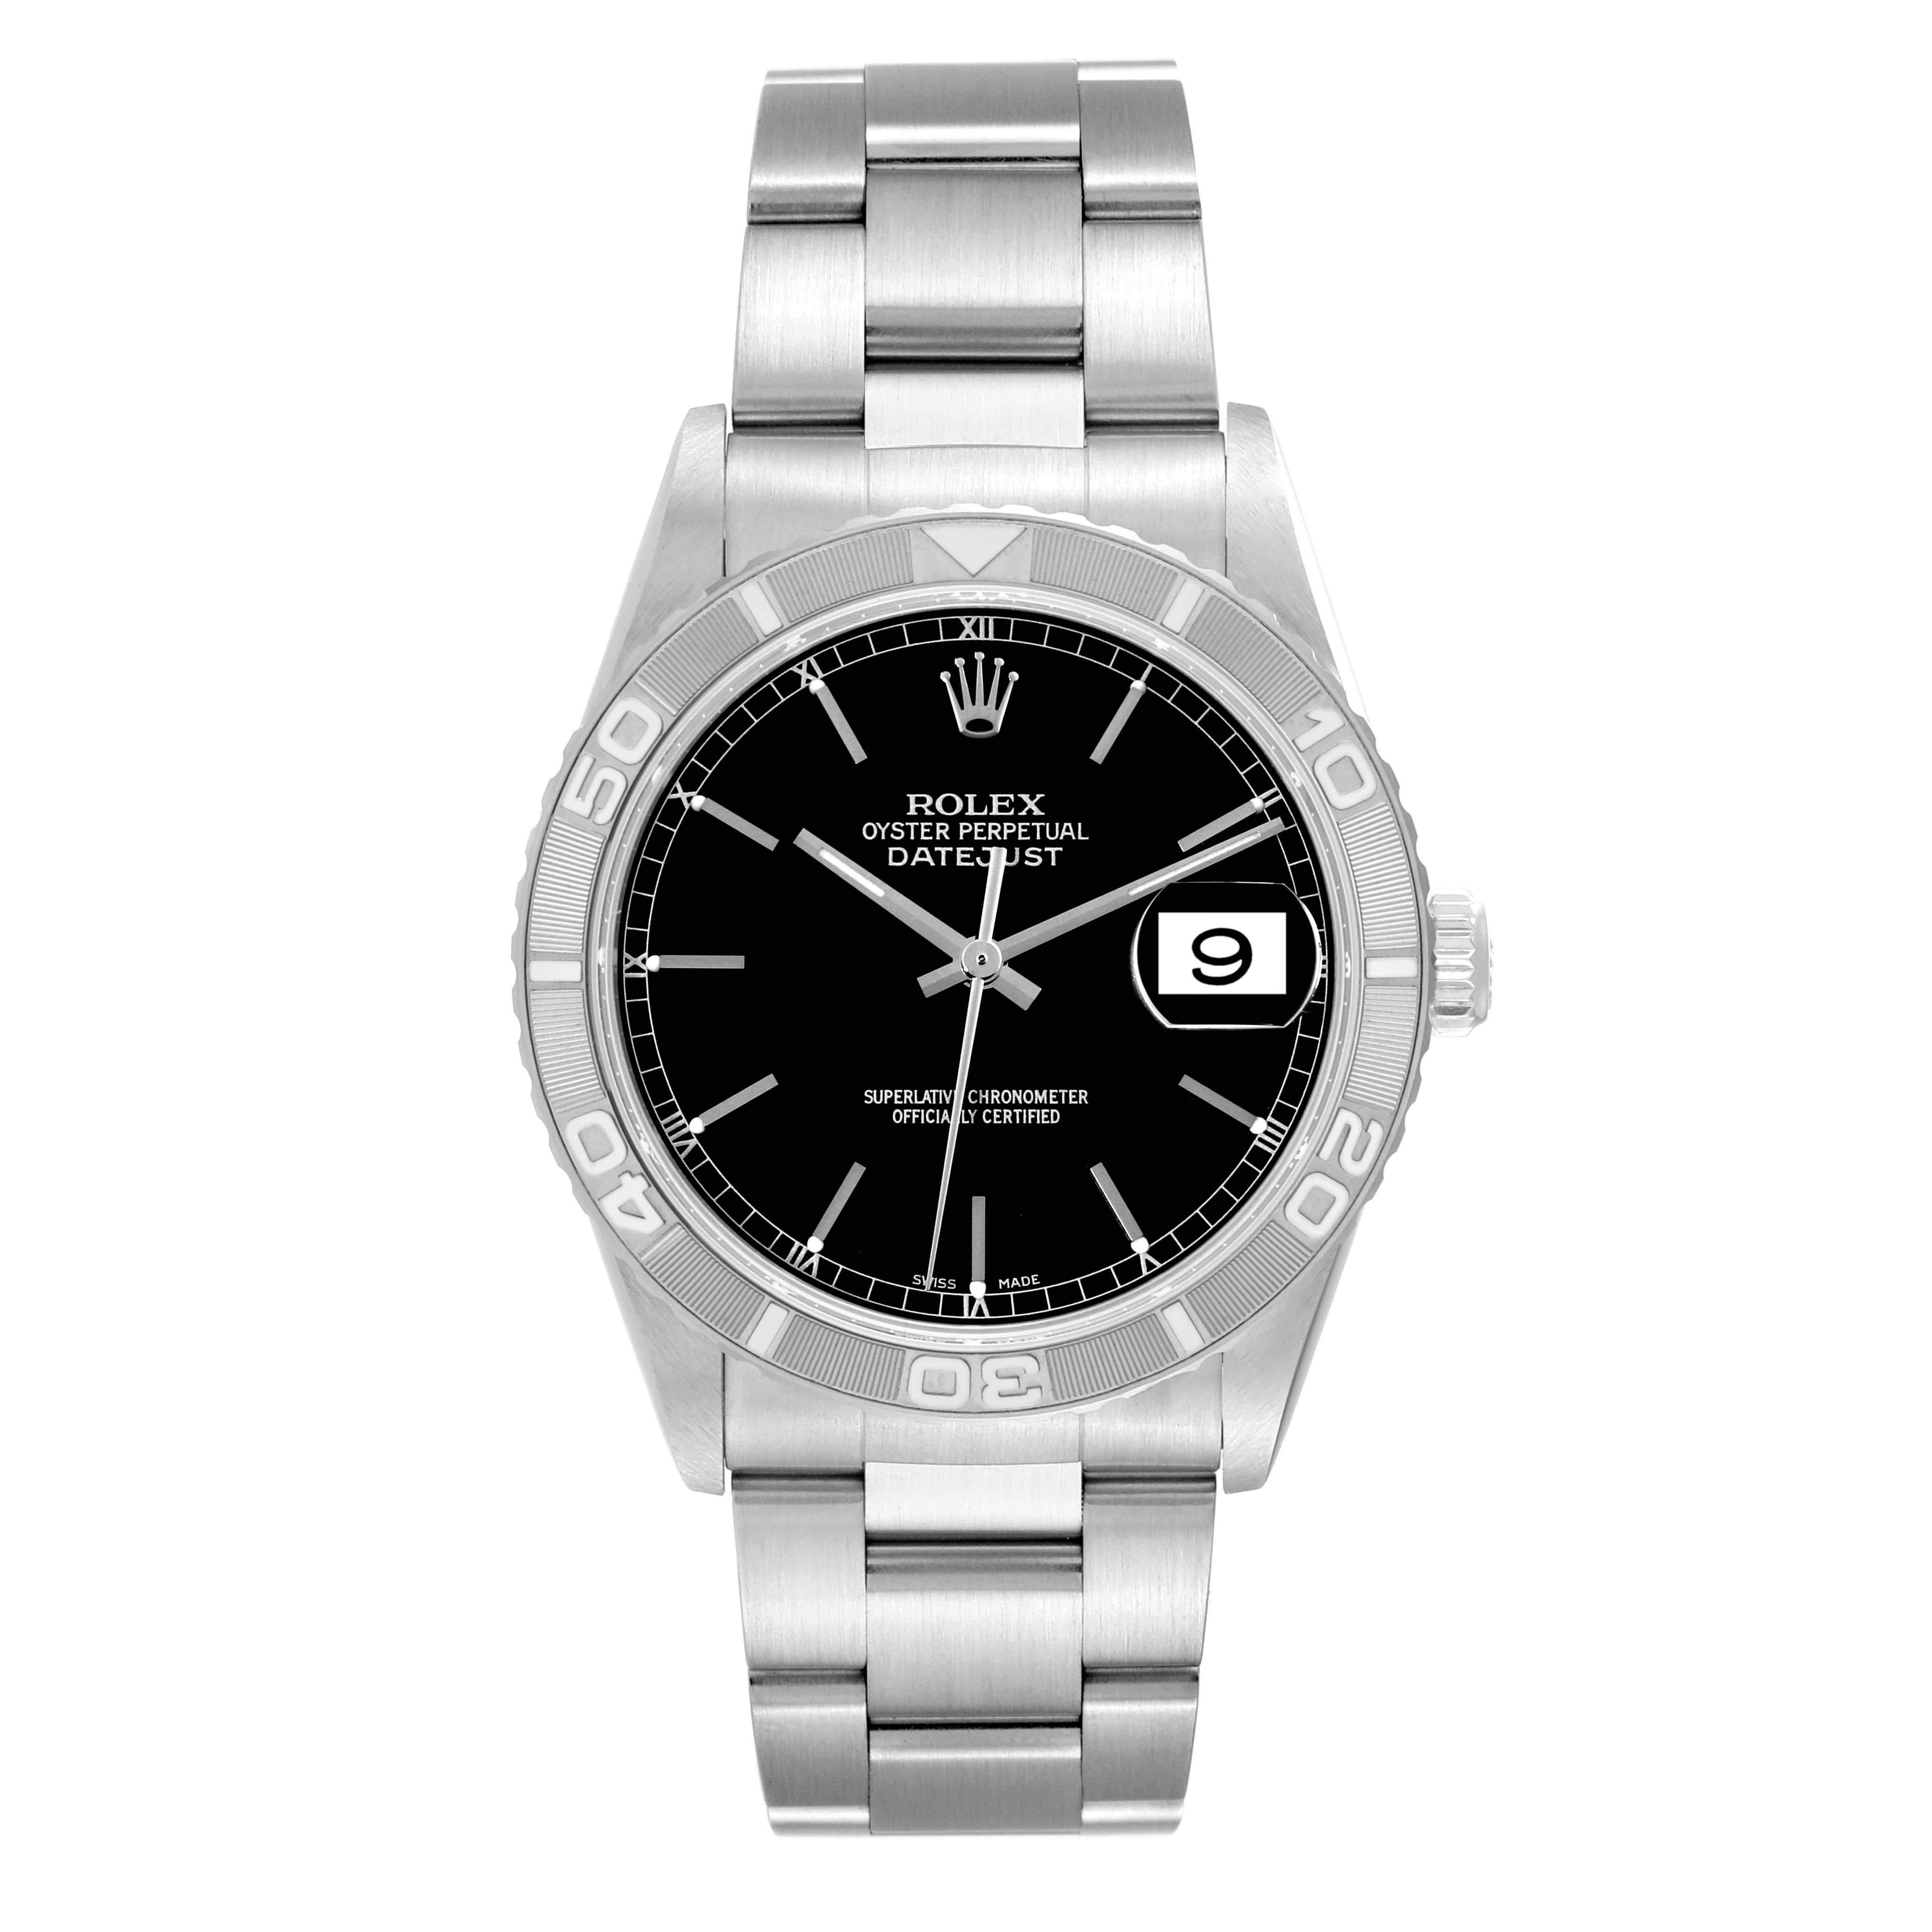 Rolex Datejust Turnograph Steel White Gold Black Dial Mens Watch 16264. Officially certified chronometer automatic self-winding movement with quickset date function. Stainless steel case 36.0 mm in diameter. Rolex logo on the crown. 18k white gold